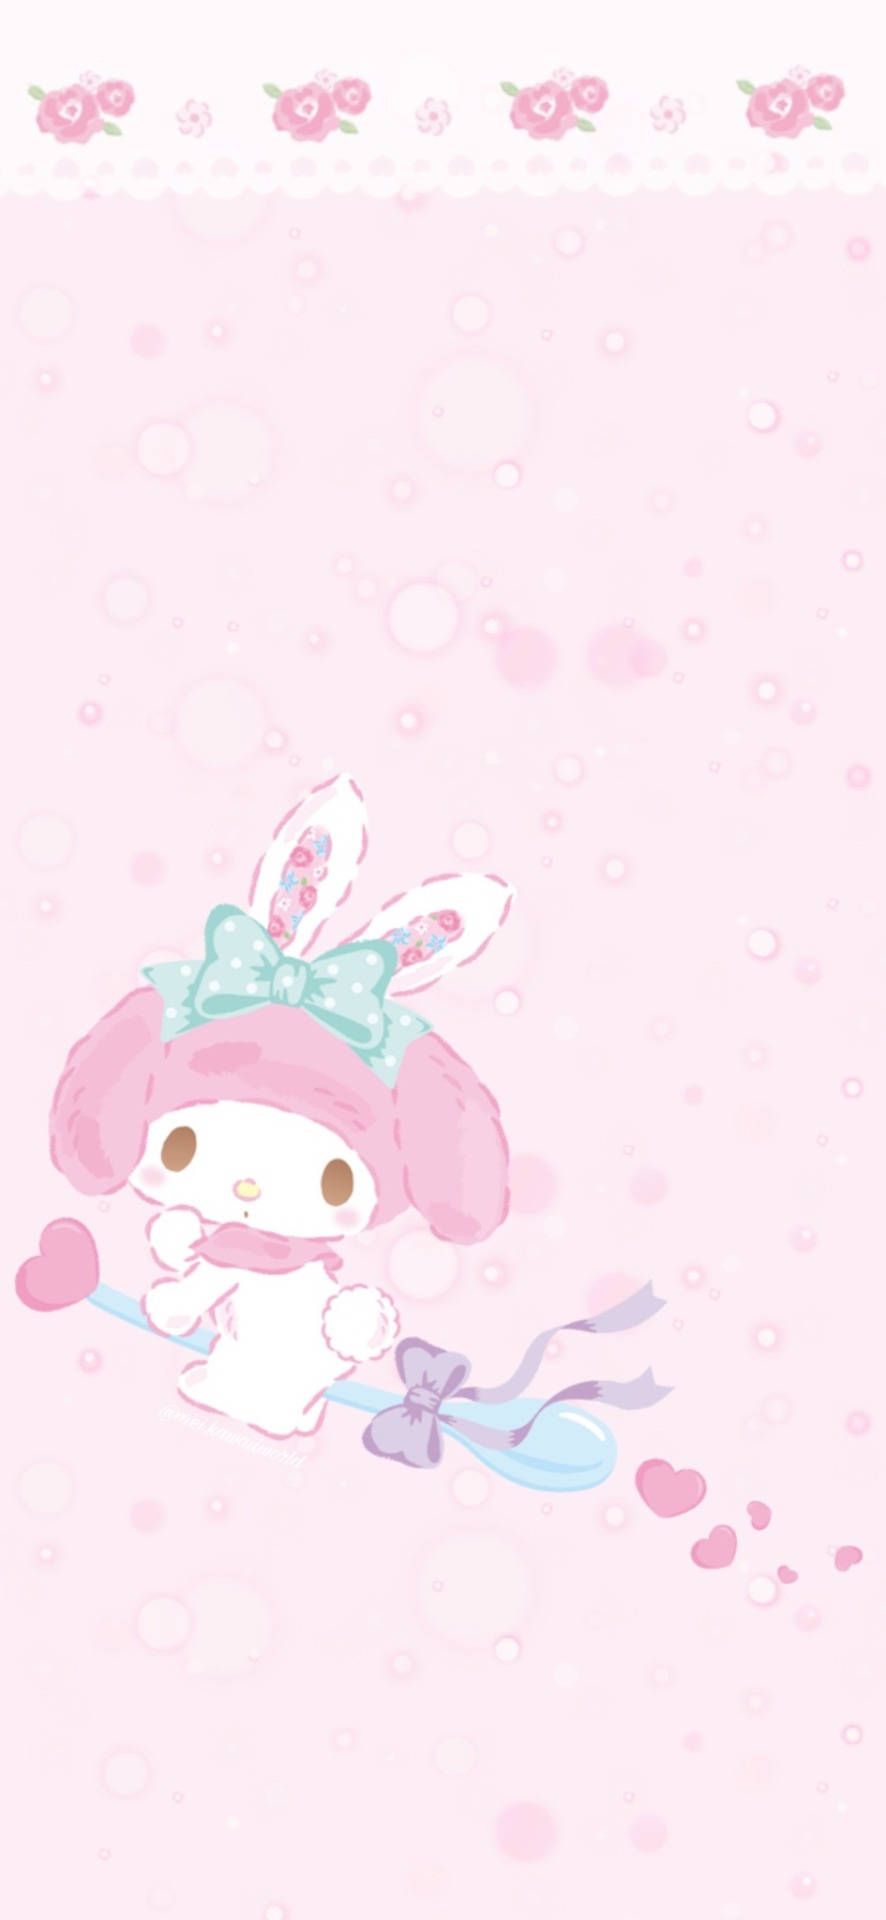 My Melody Riding A Spoon Wallpaper